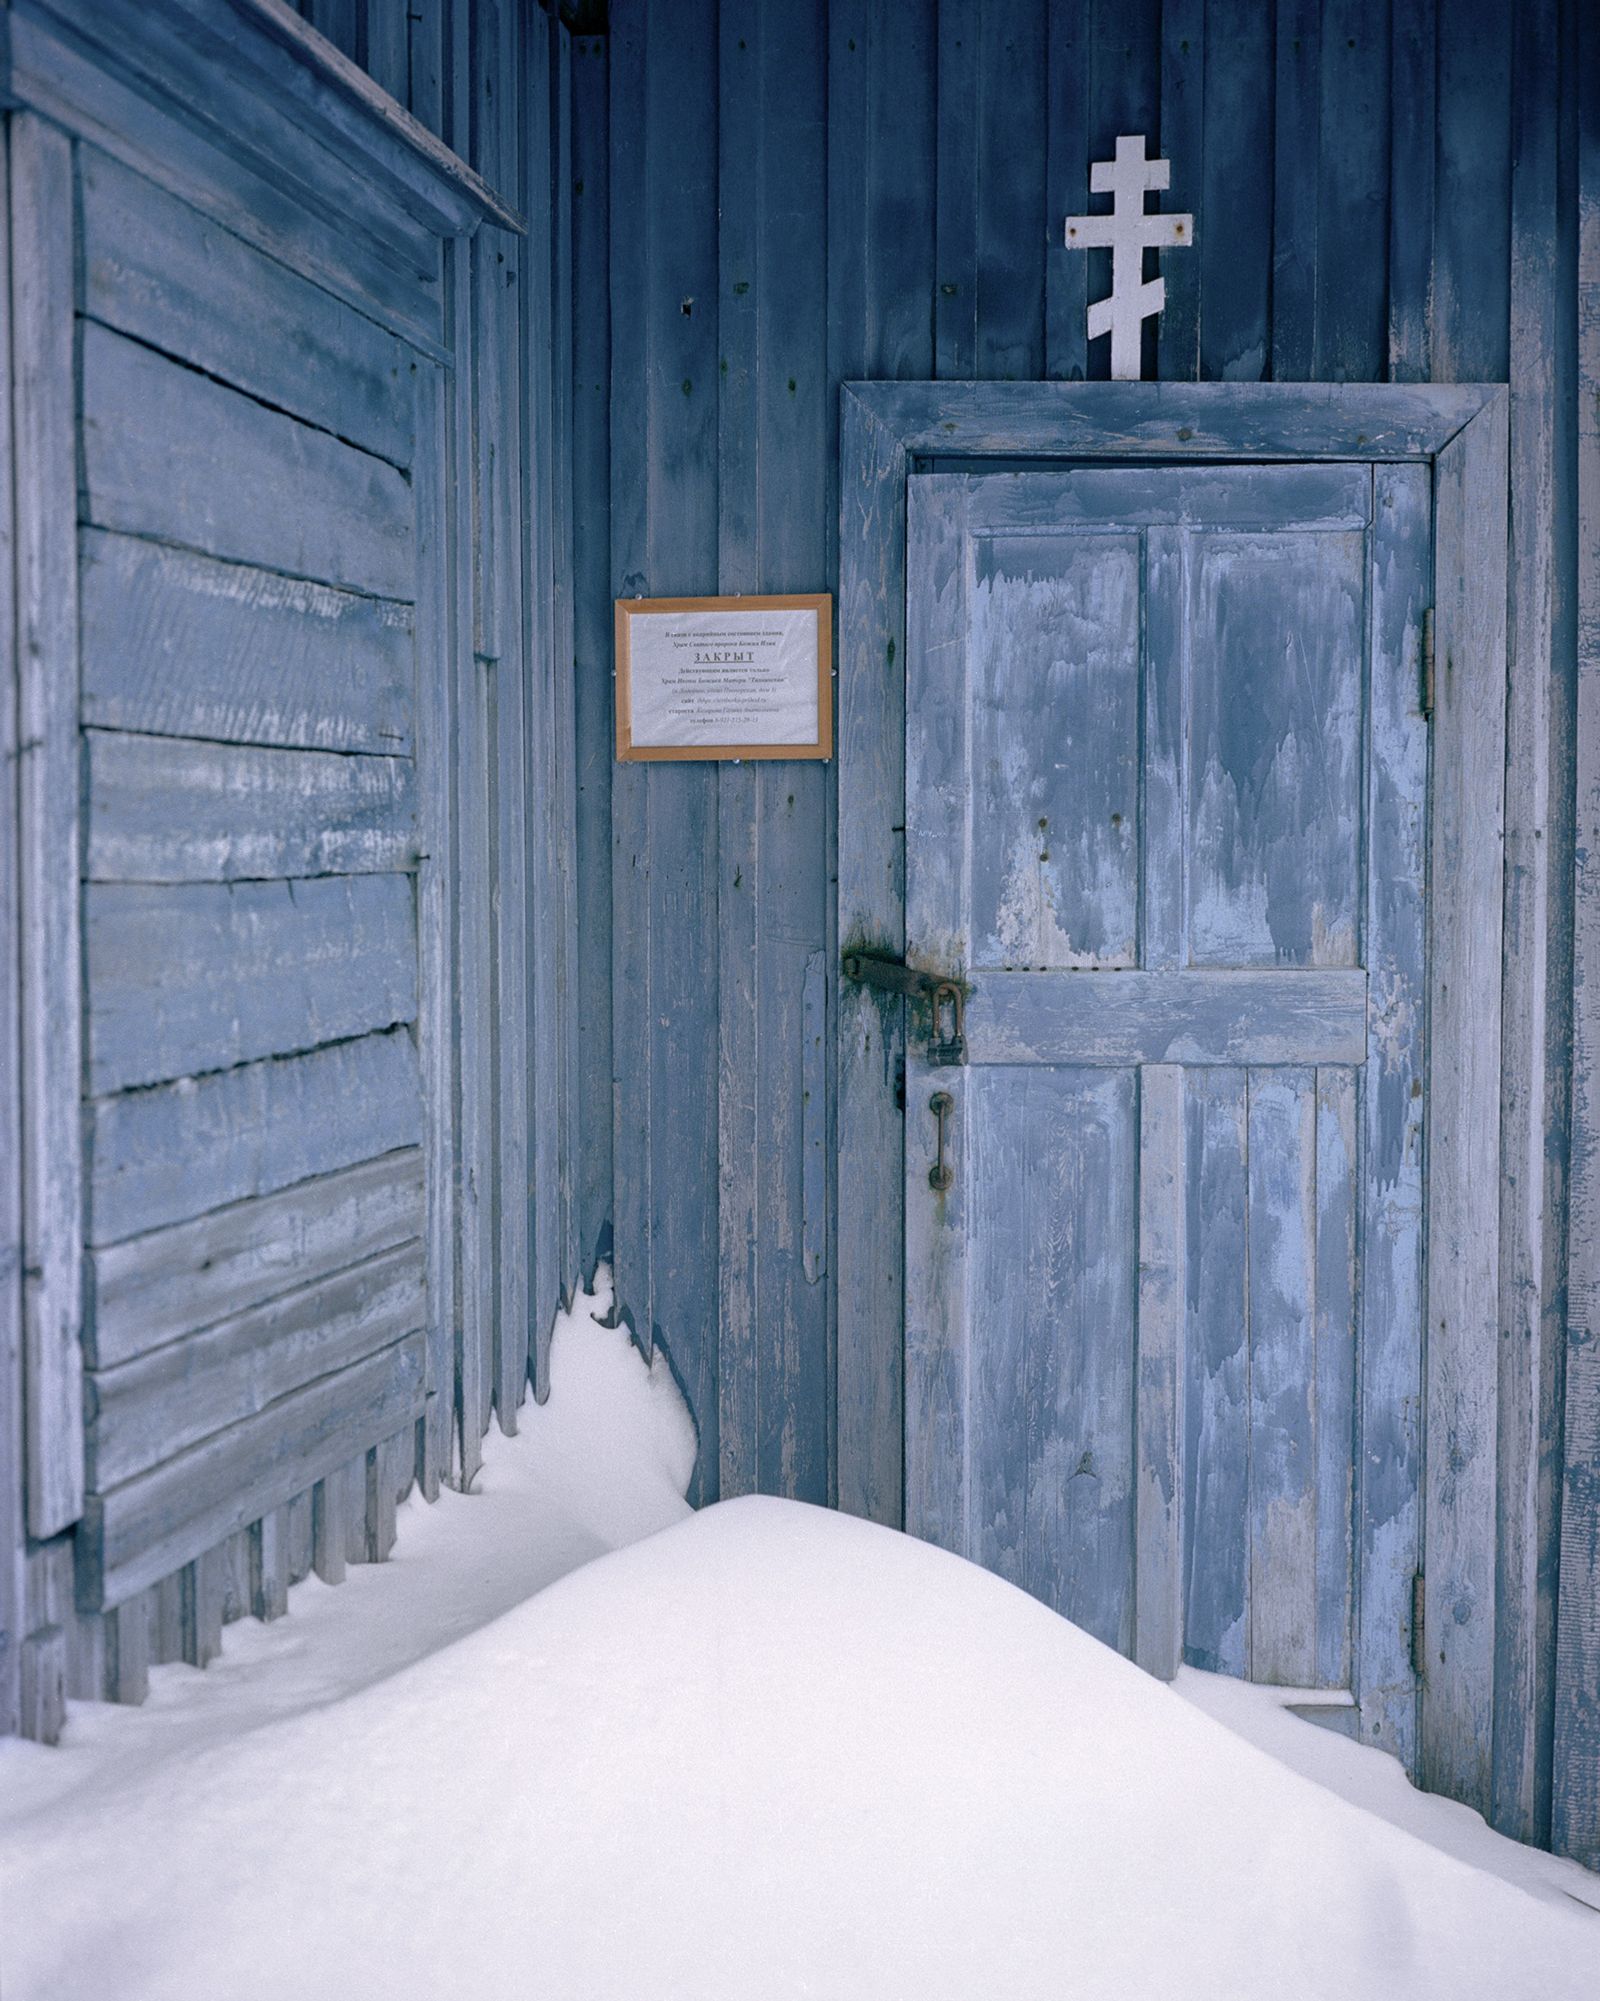 © Tanya Sharapova - The doors of a Christian church in Teriberka, which is closed as it is in a state of disrepair.